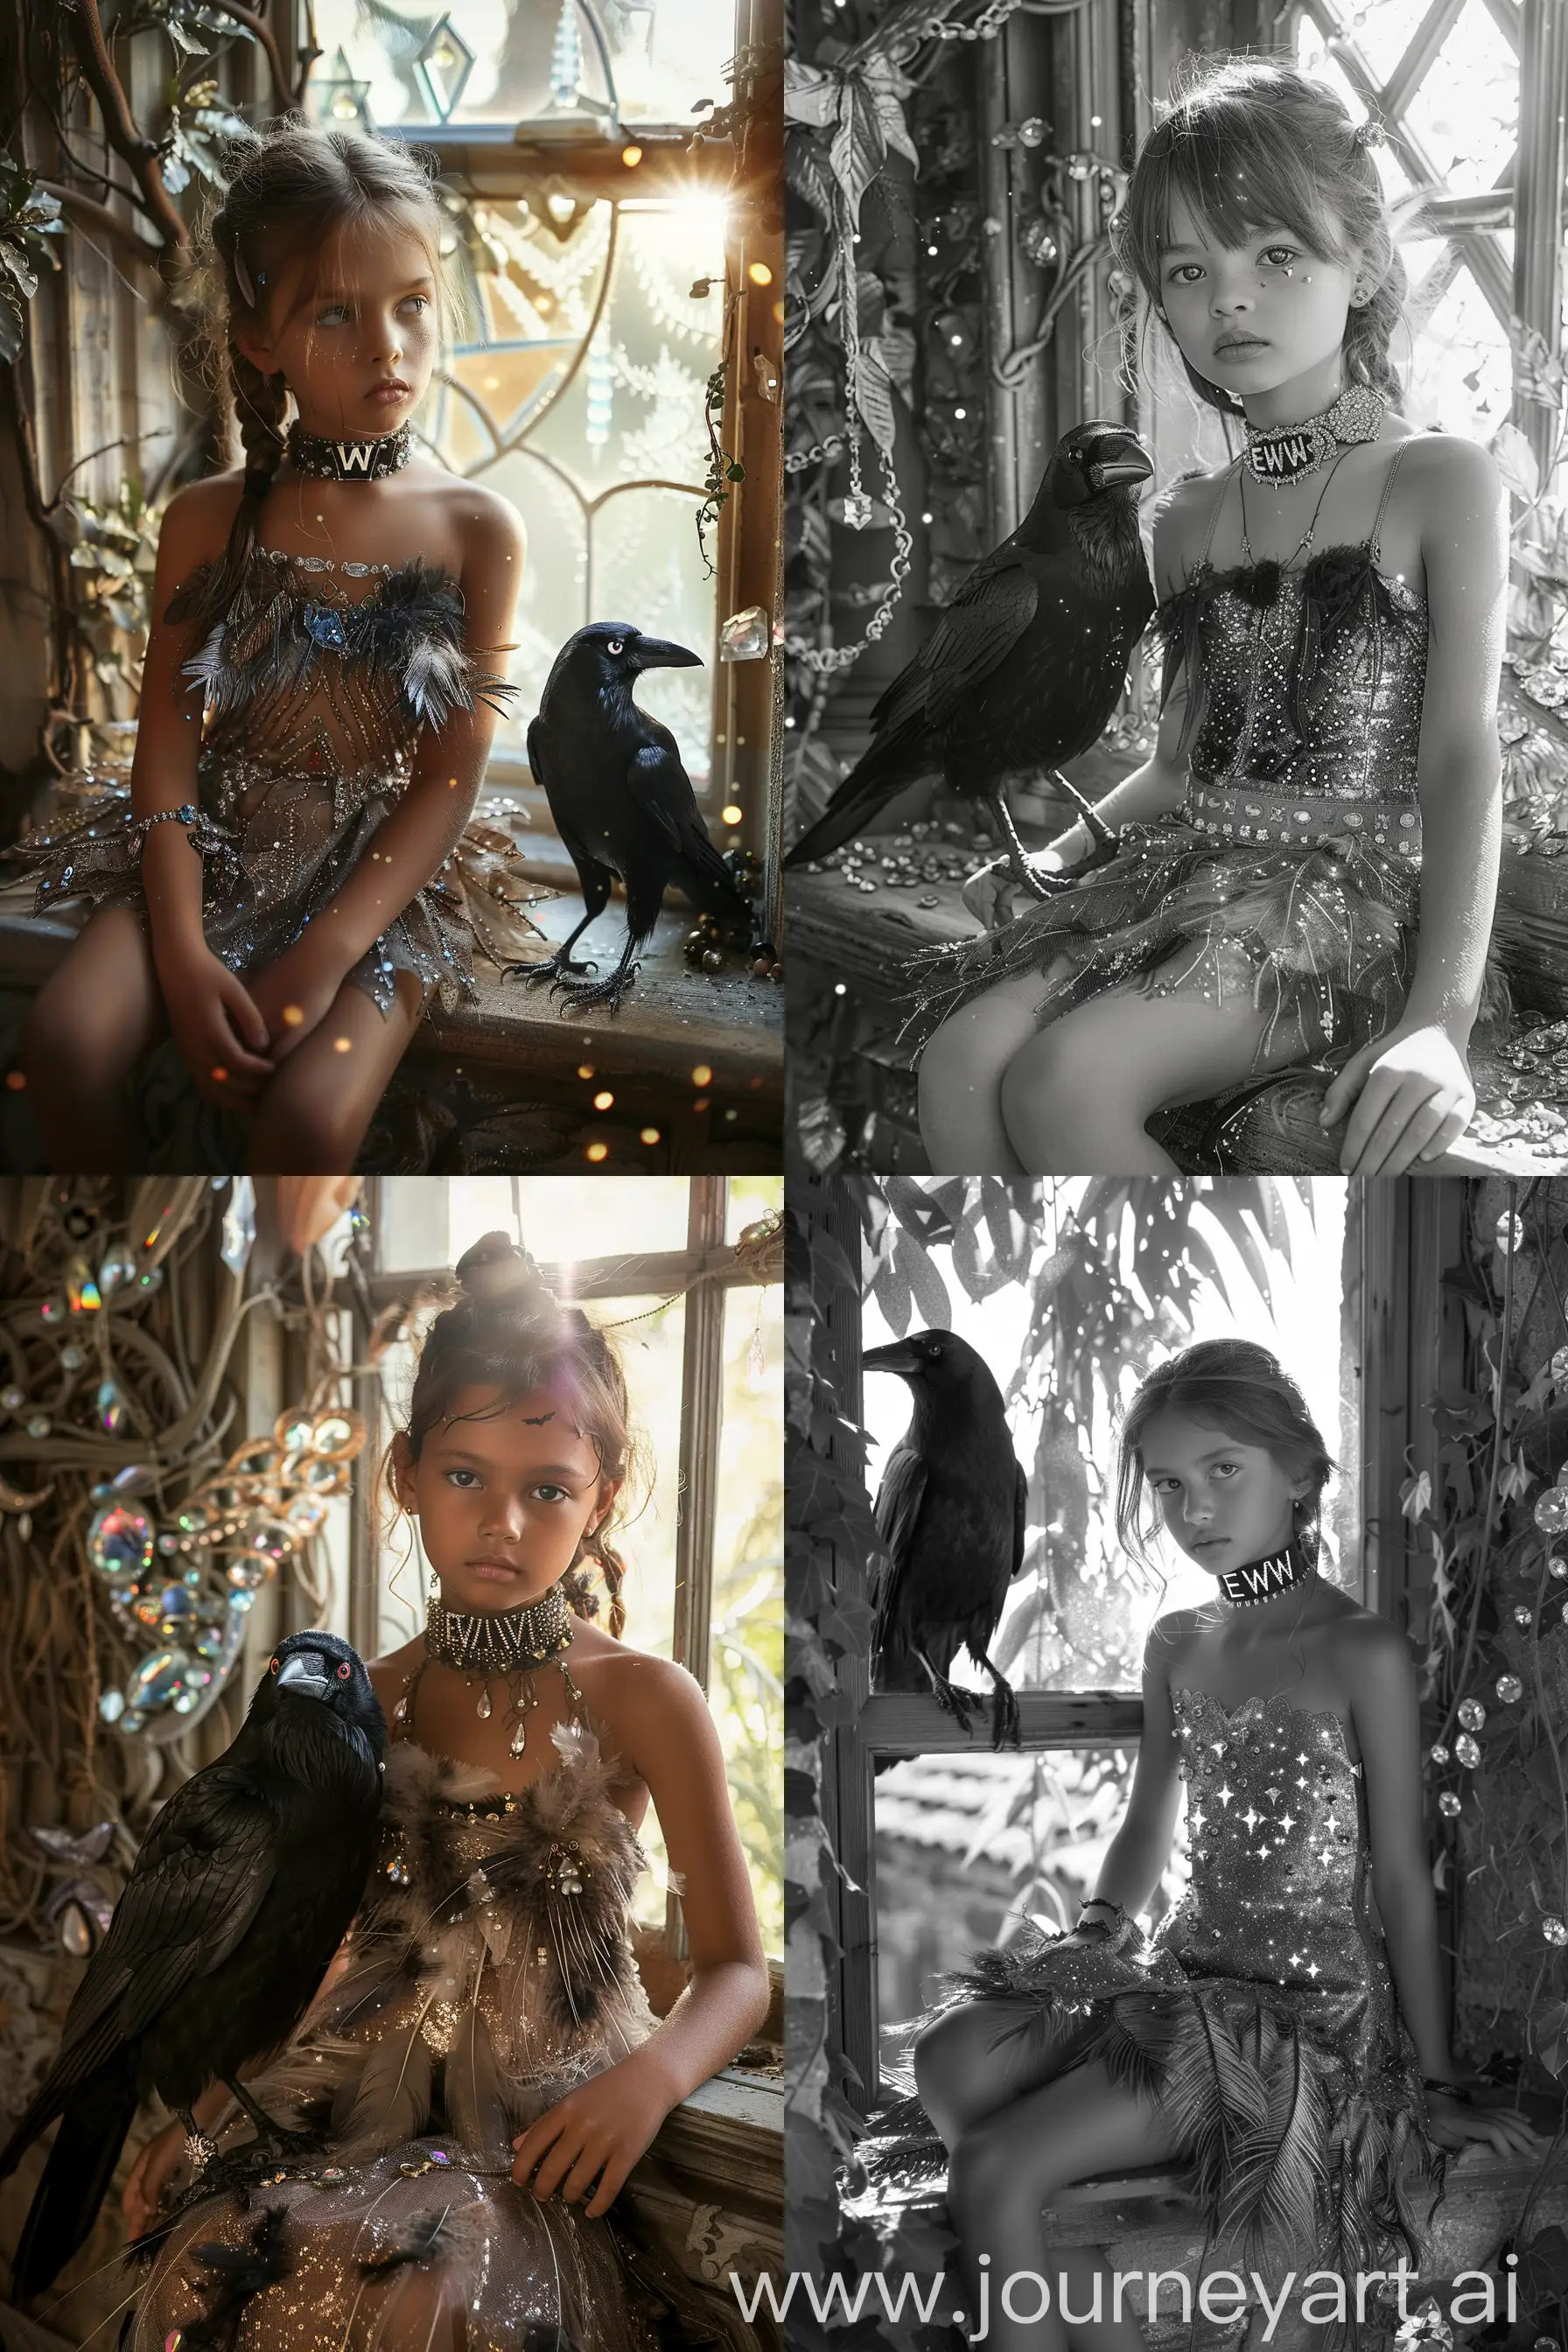 Gothic-Fantasy-Girl-with-Crow-Young-Girl-Adorned-in-Gems-and-Crowfeathers-on-Window-Sill